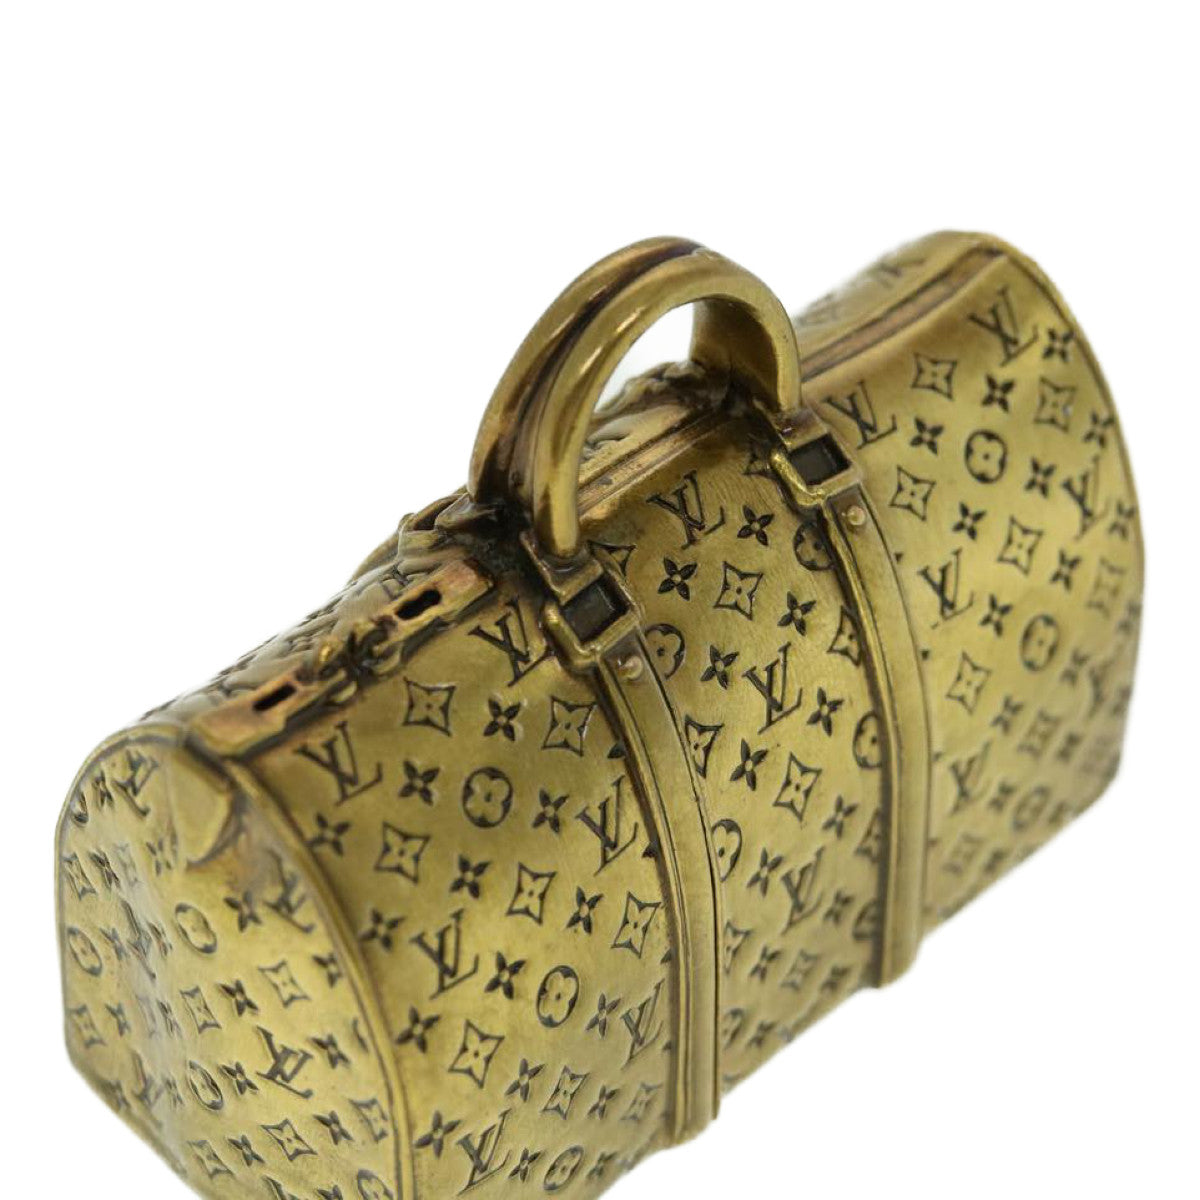 LOUIS VUITTON Paper weight metal Gold Tone LV Auth 30902A